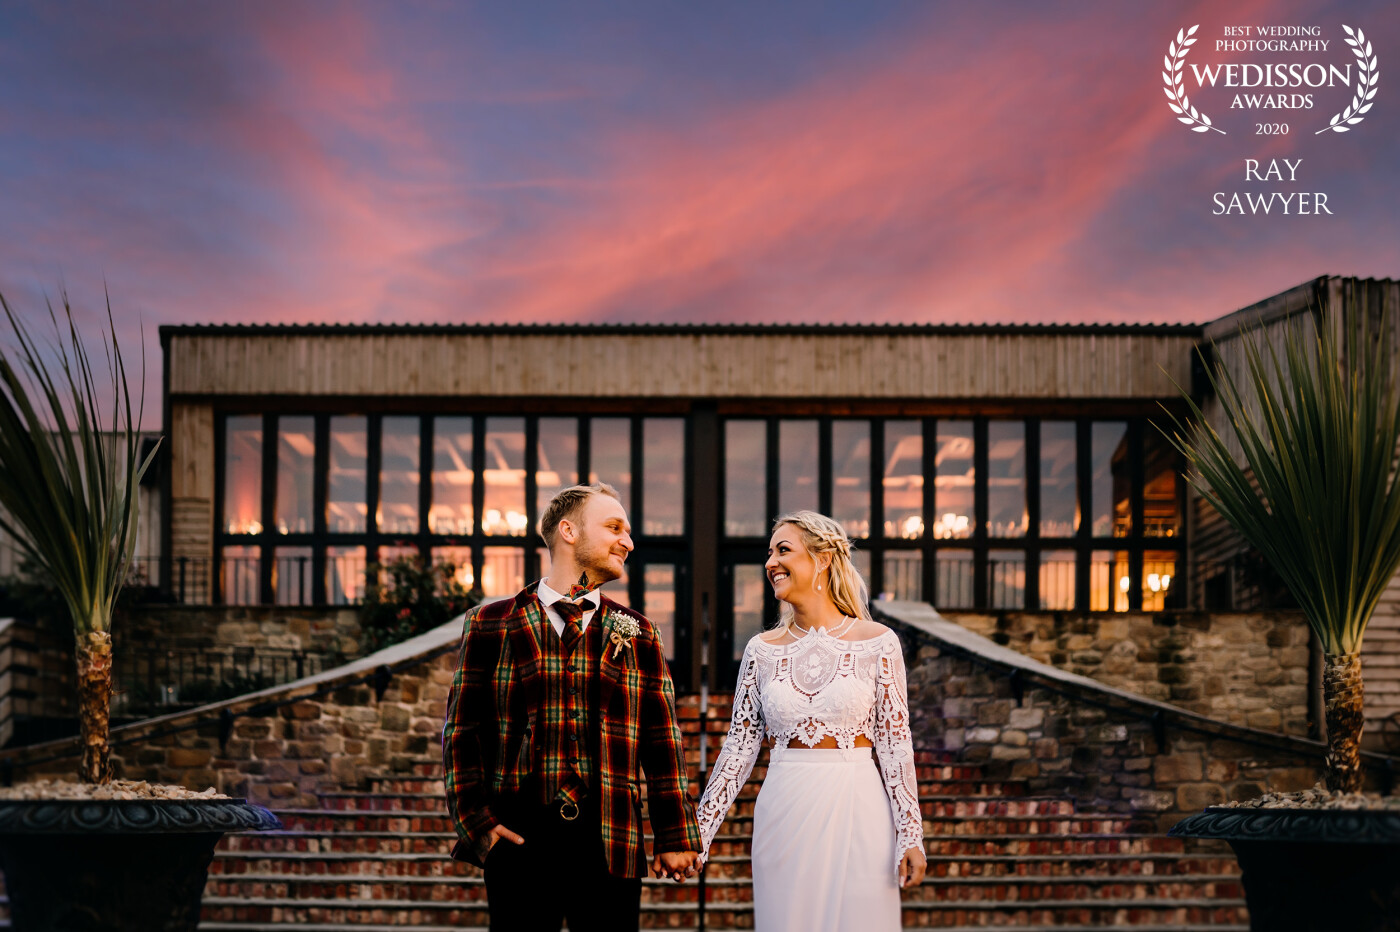 Love the tones in this beautiful image captured at The South Causey Inn Old Barn. I went to school with Sarah so it was an honor to photograph her wedding to Lewis. That dress and Suit. Trendy!